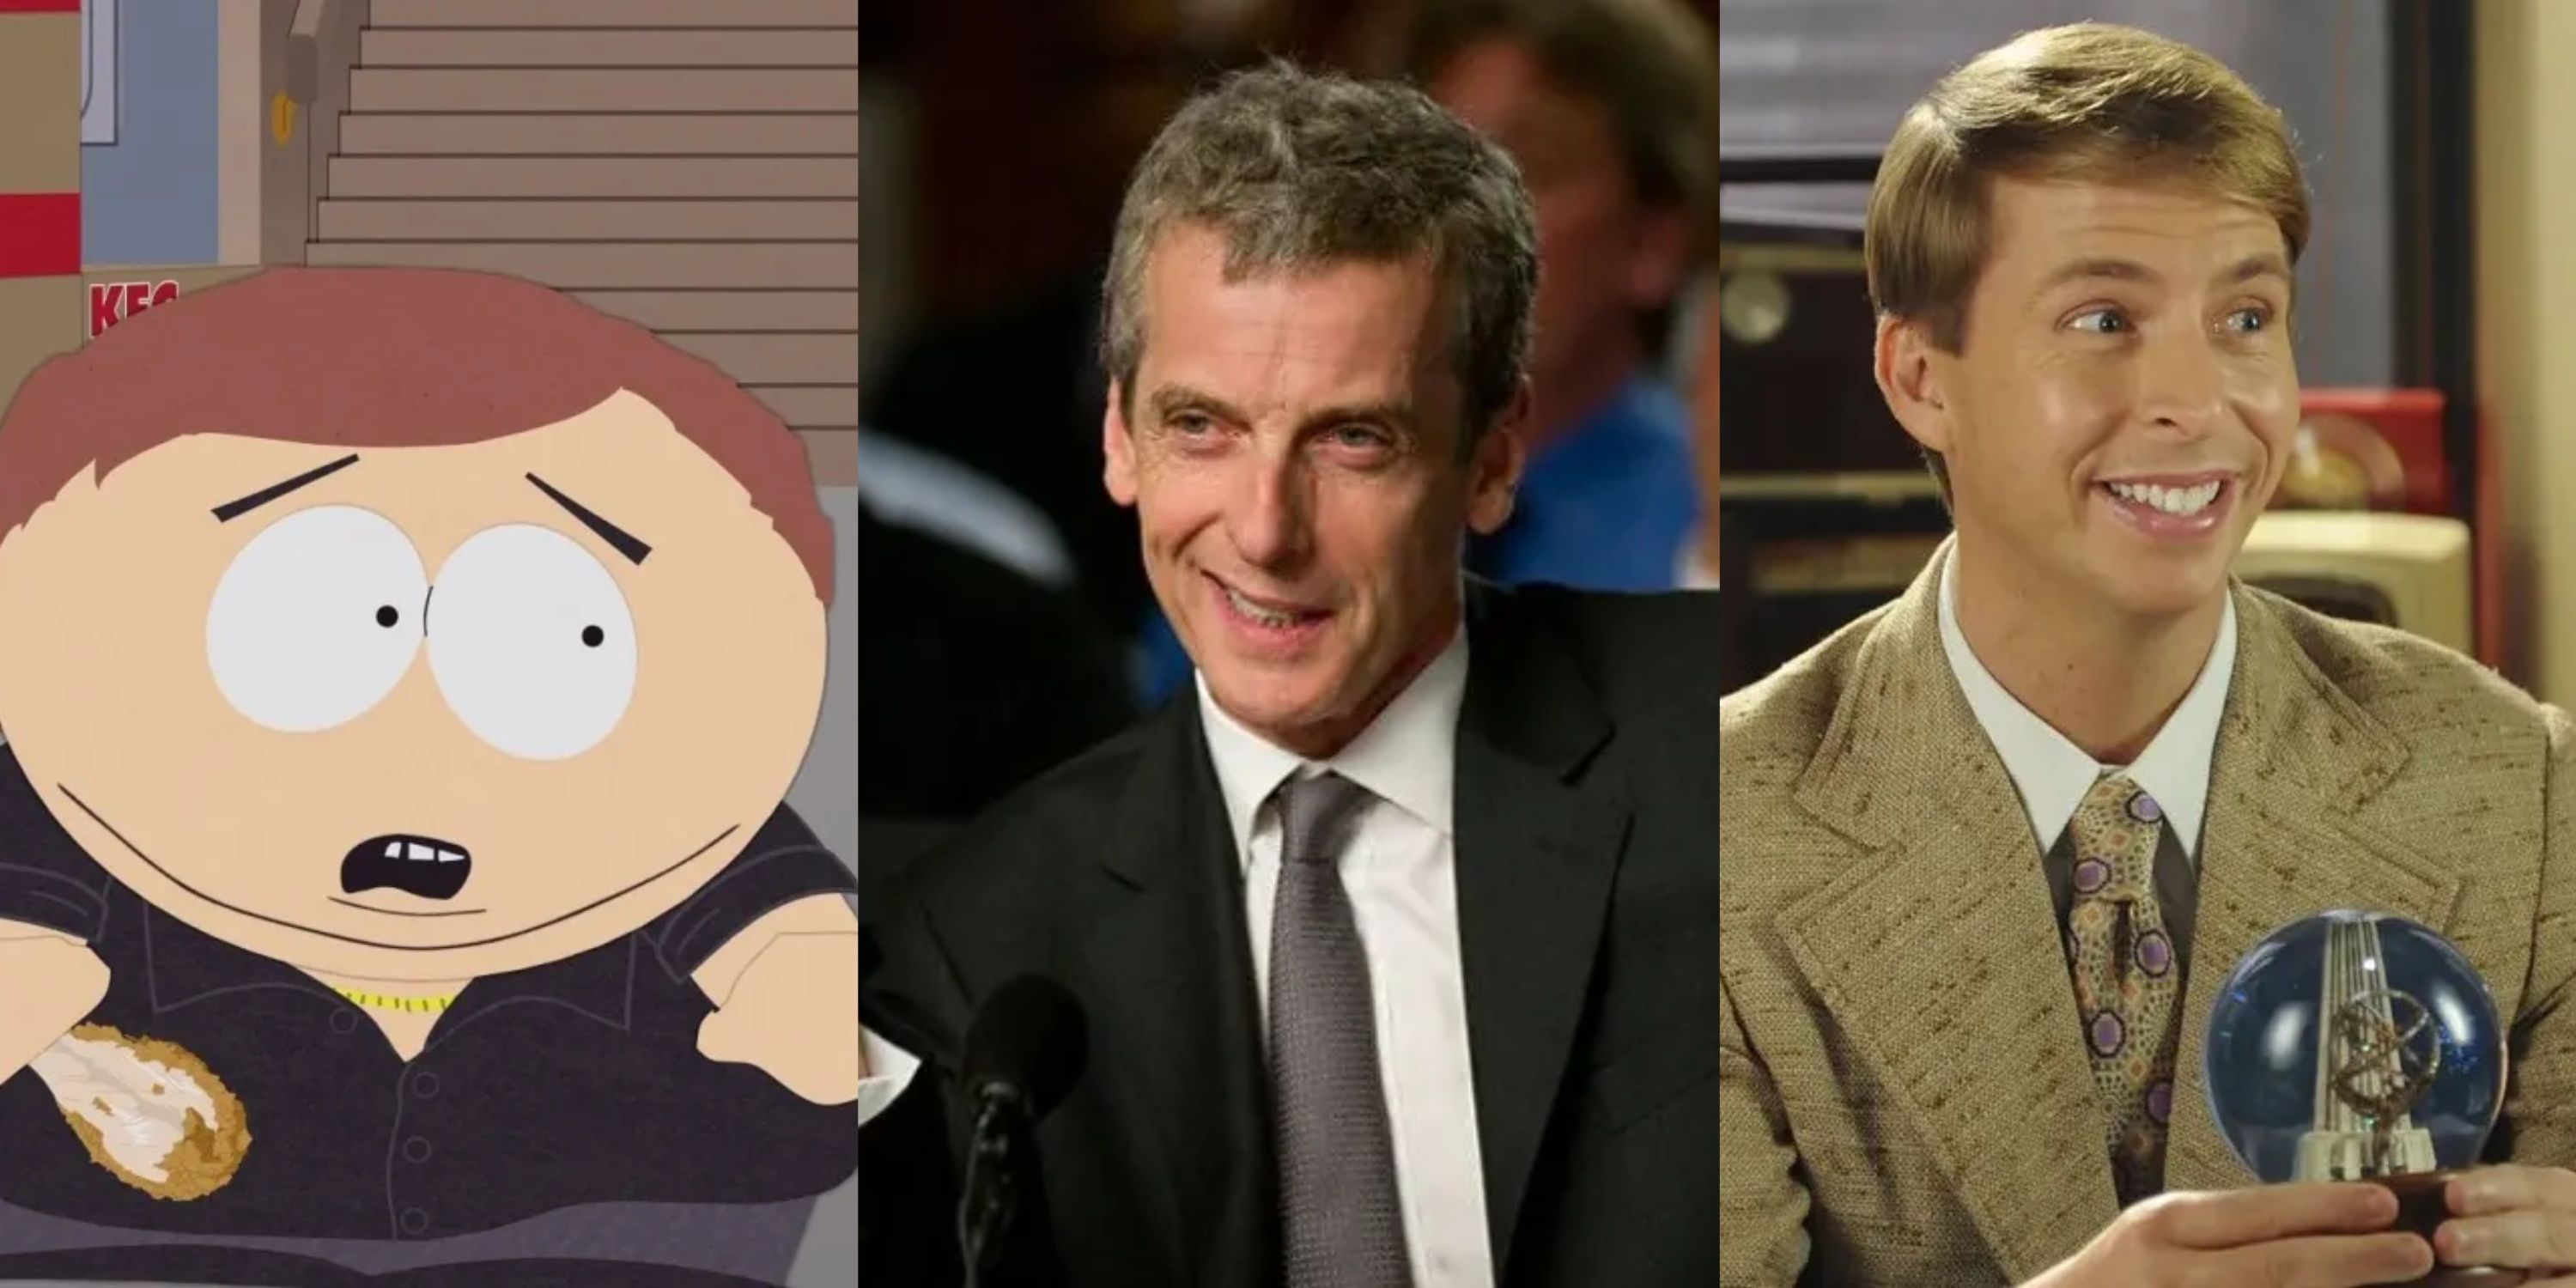 20 'South Park' Characters Through the Years: Then vs. Now